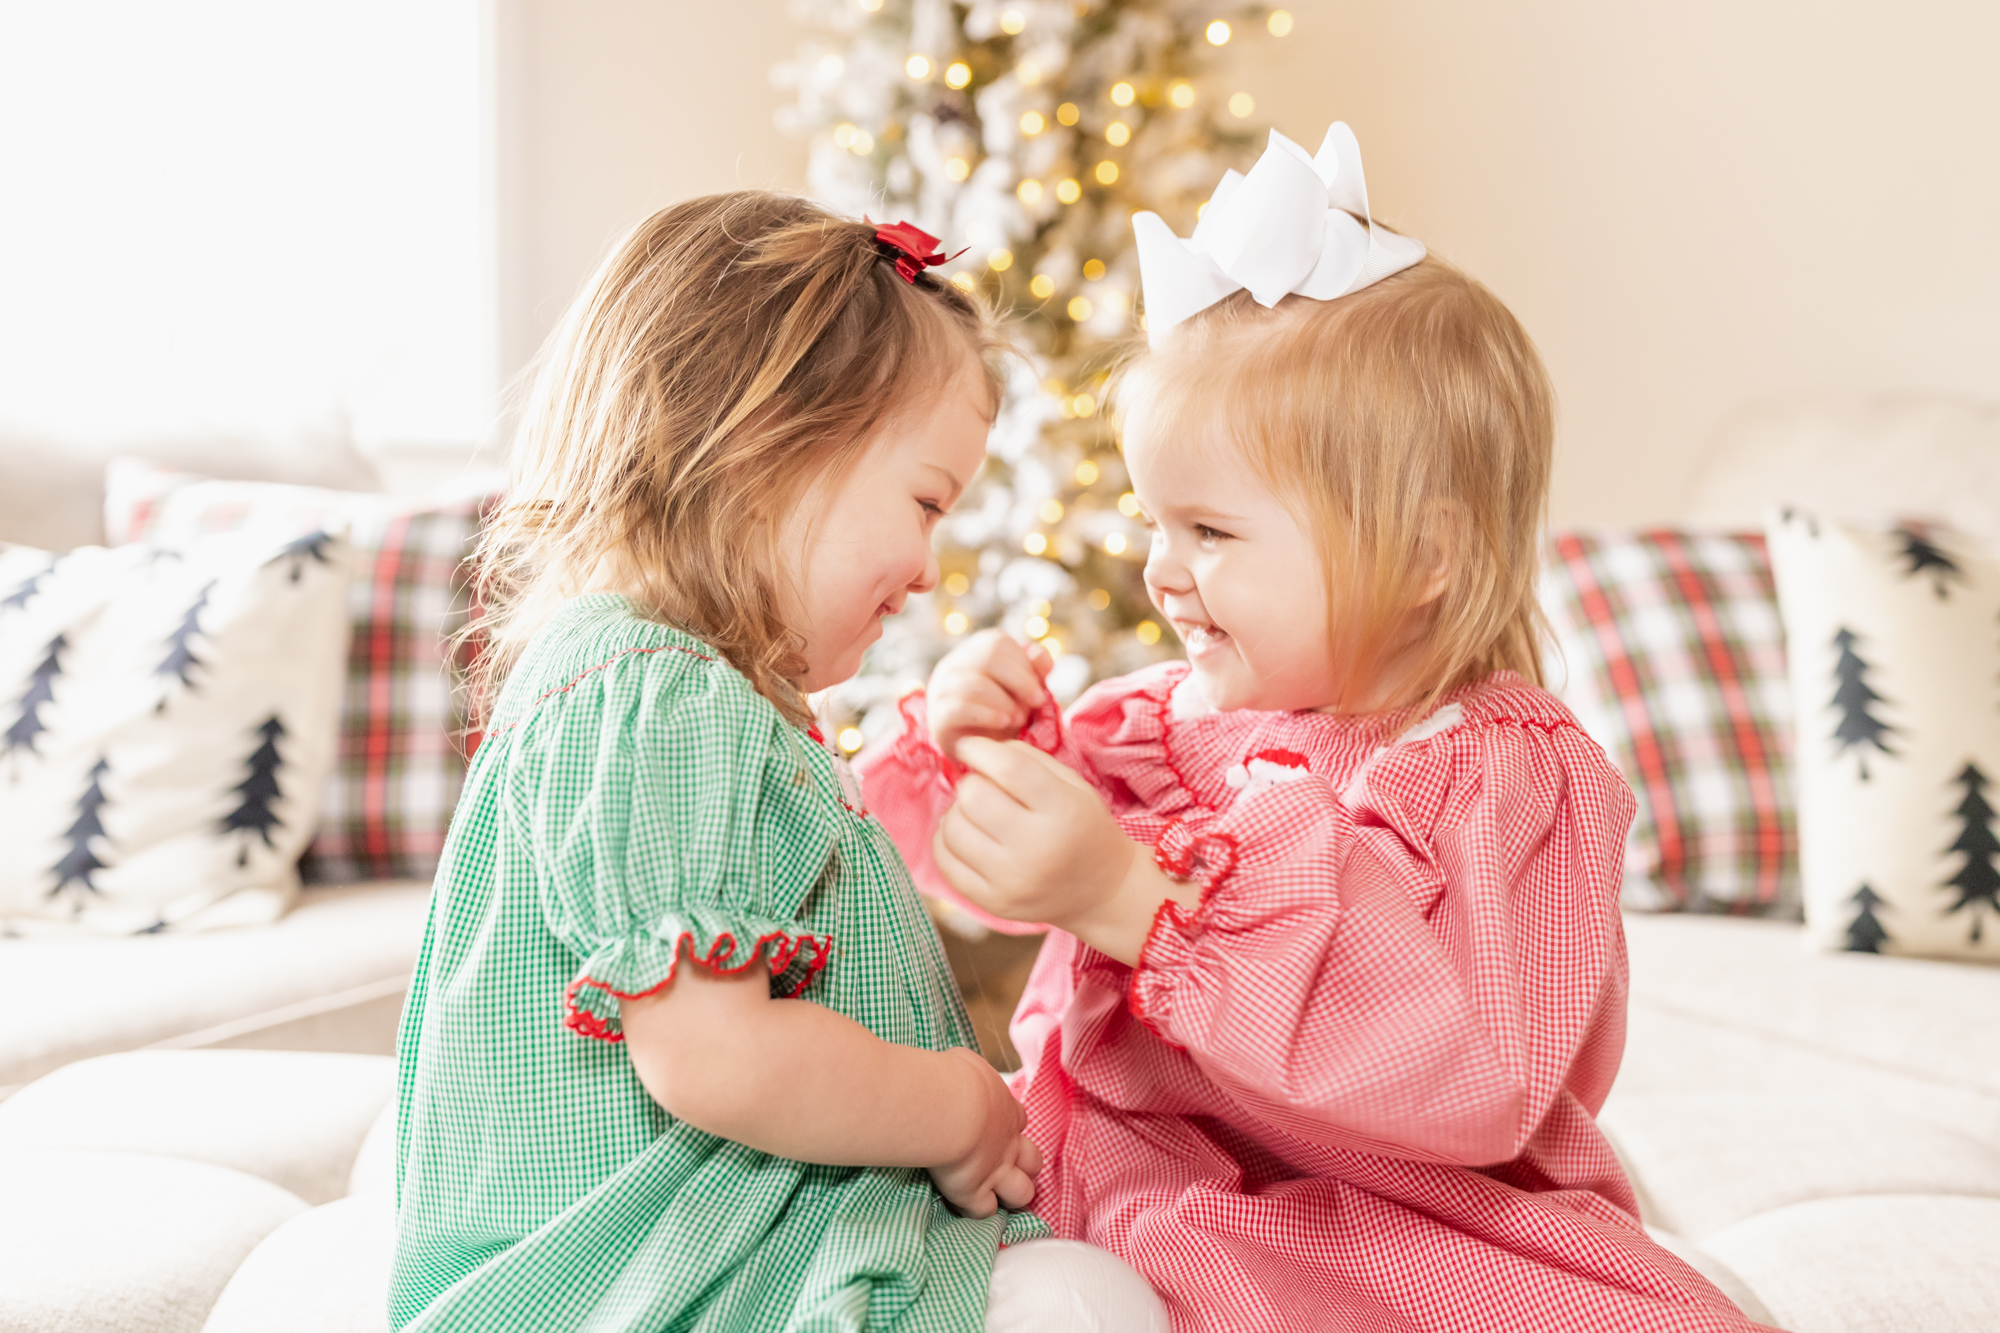 Toddler girls in smocked dresses playing in front of a Christmas tree